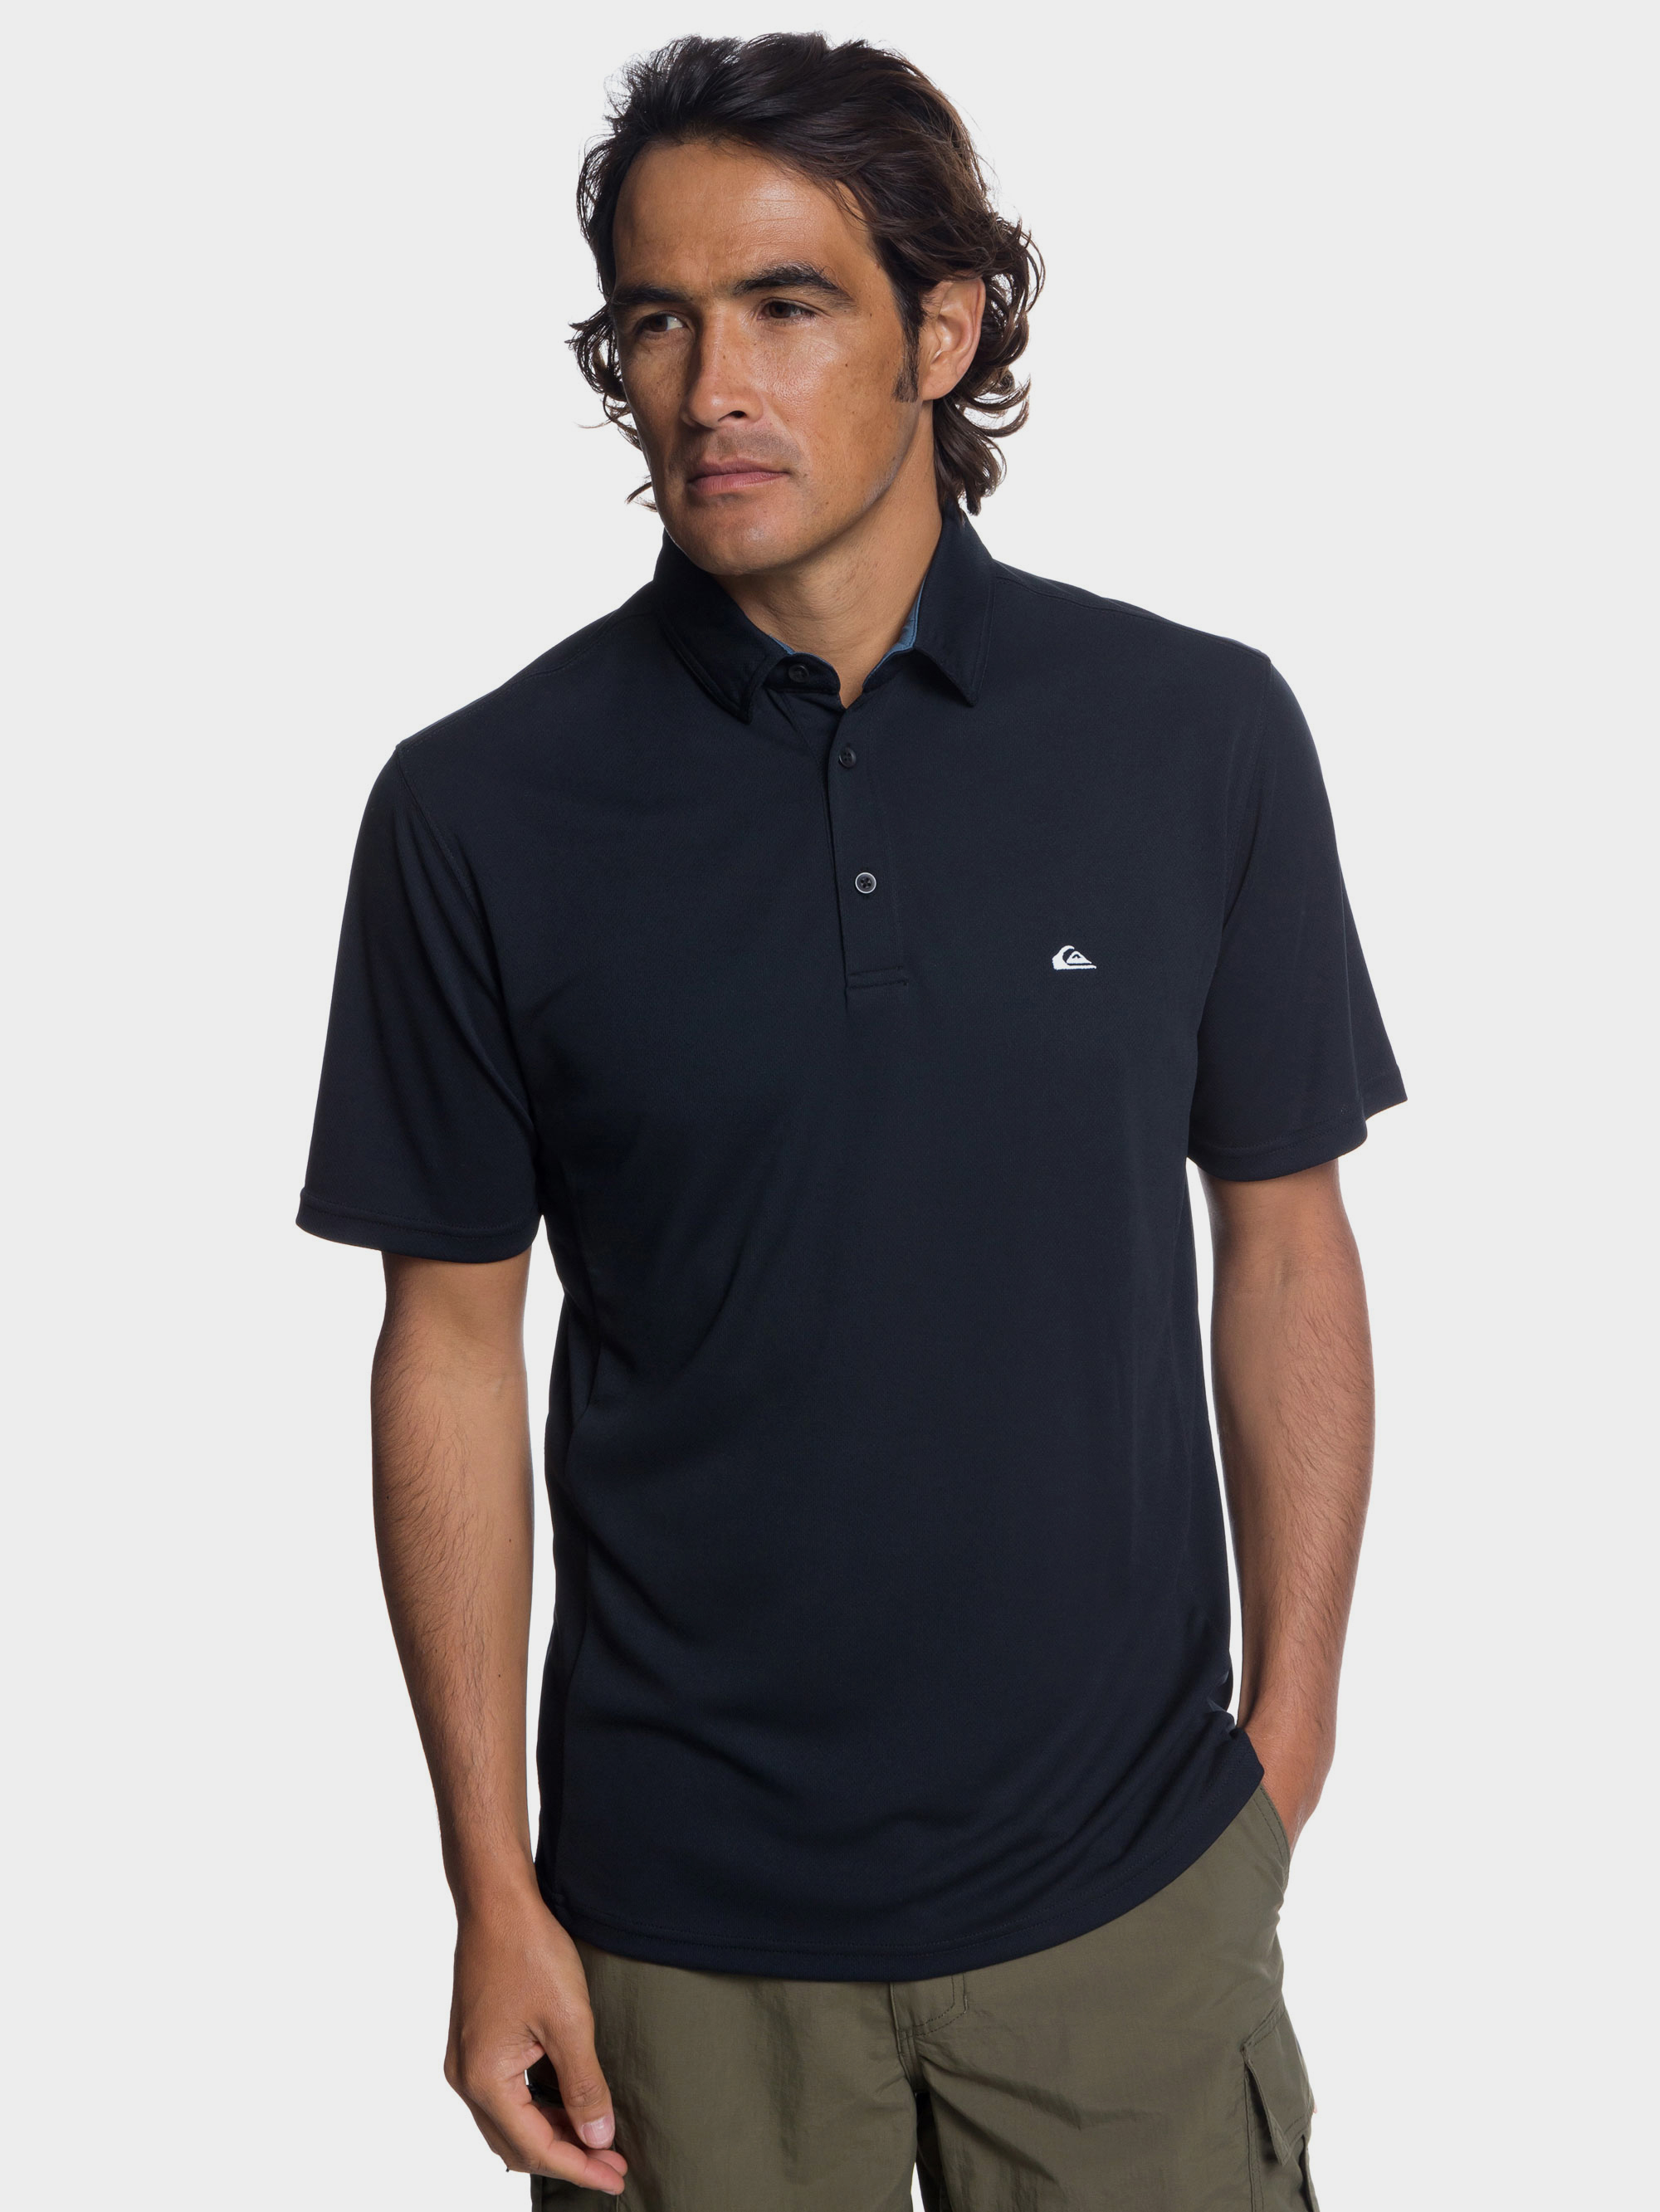 Quiksilver Mens Water 2 Polo Tee